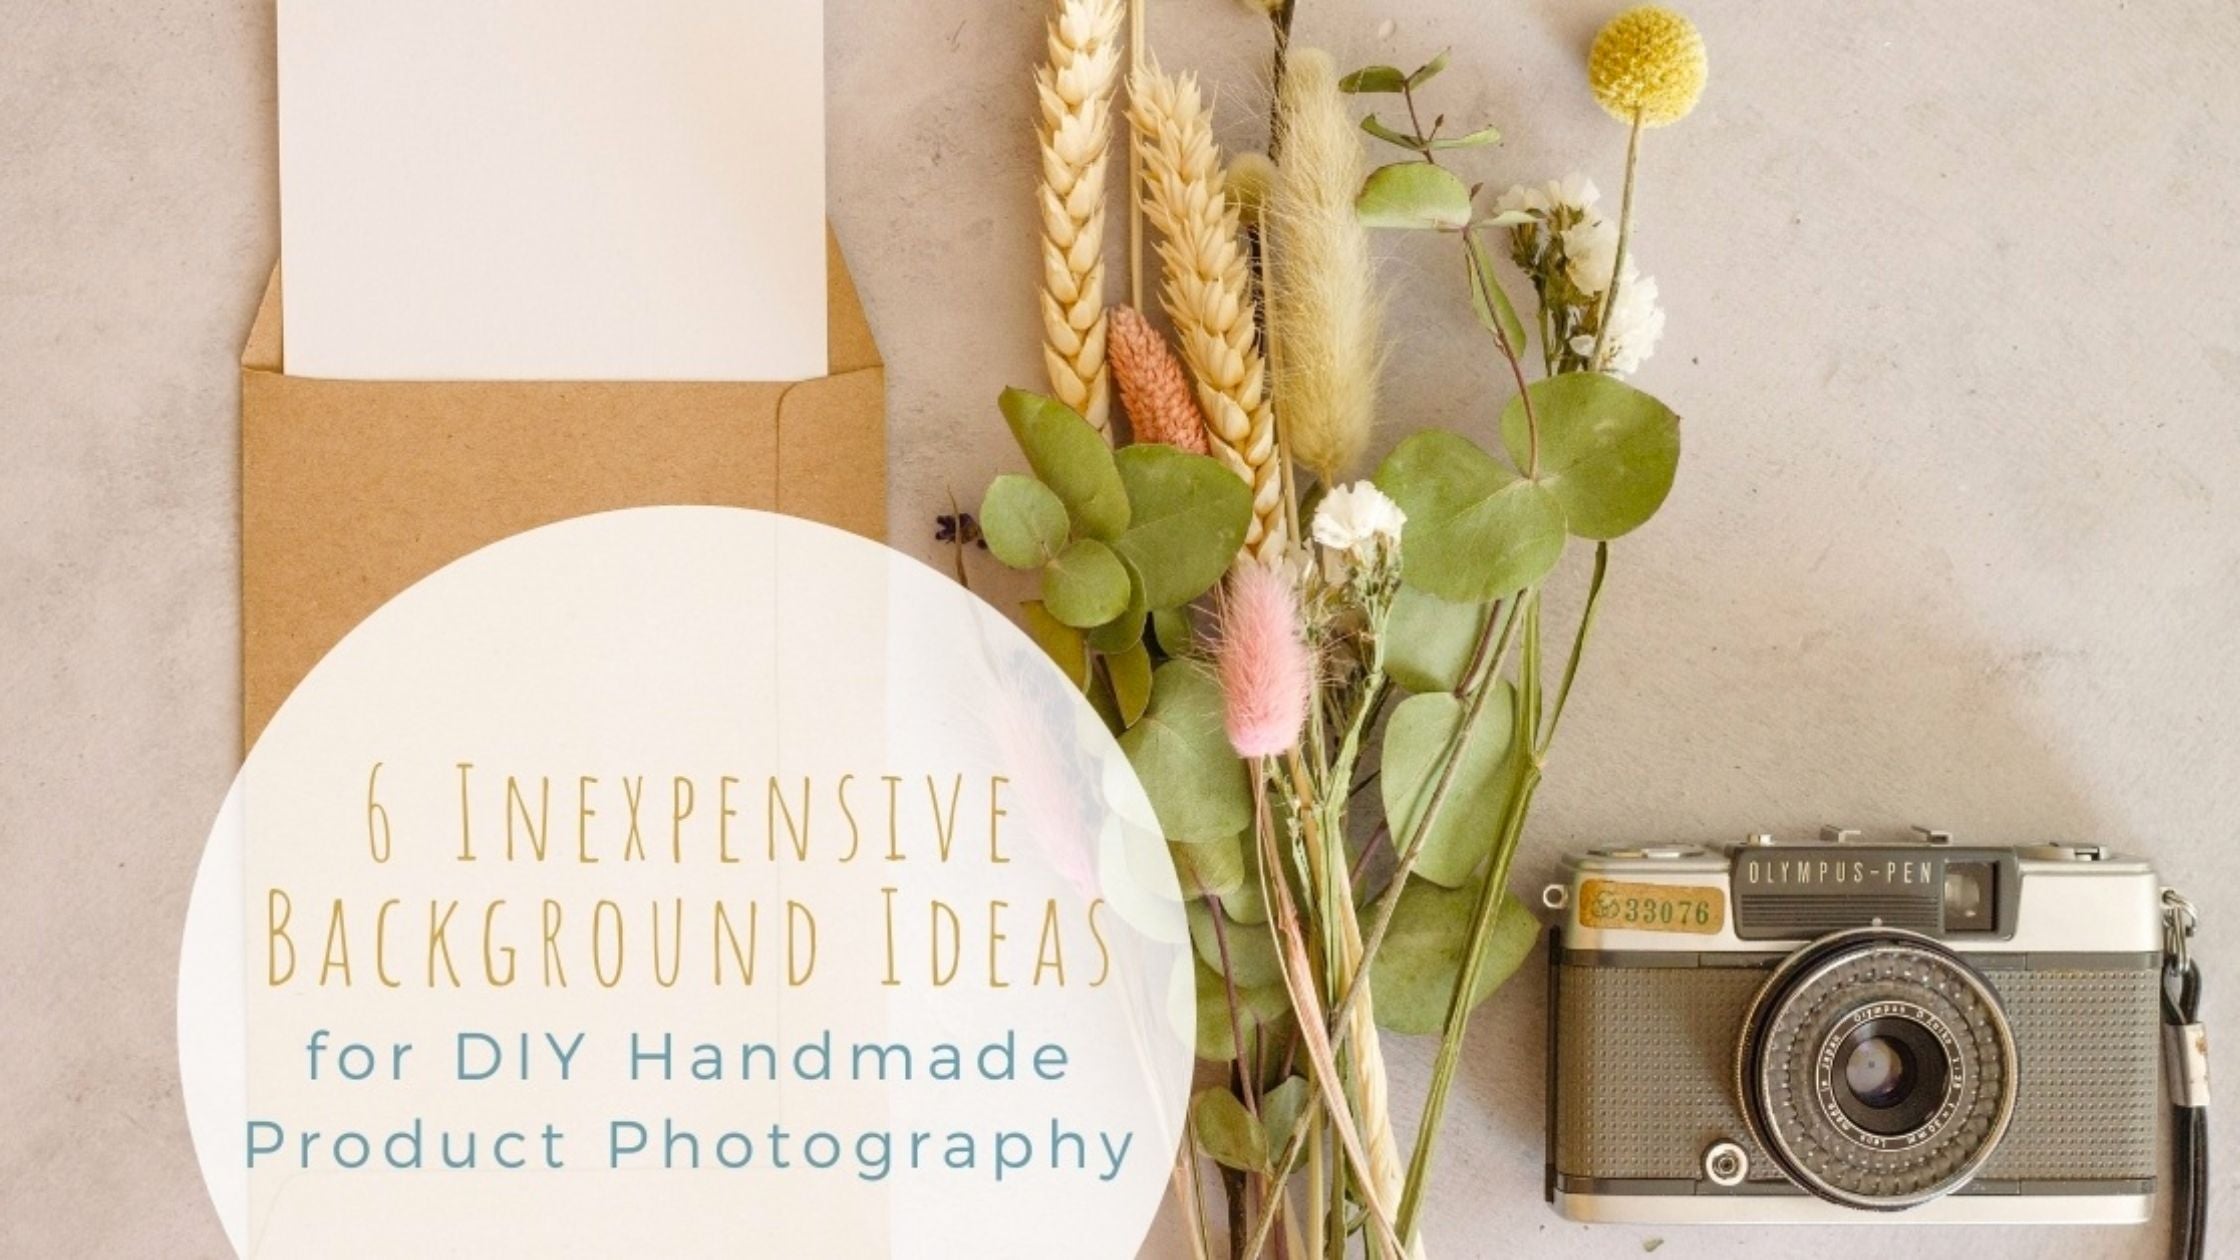 6 Inexpensive Background Ideas for DIY Handmade Product Photography